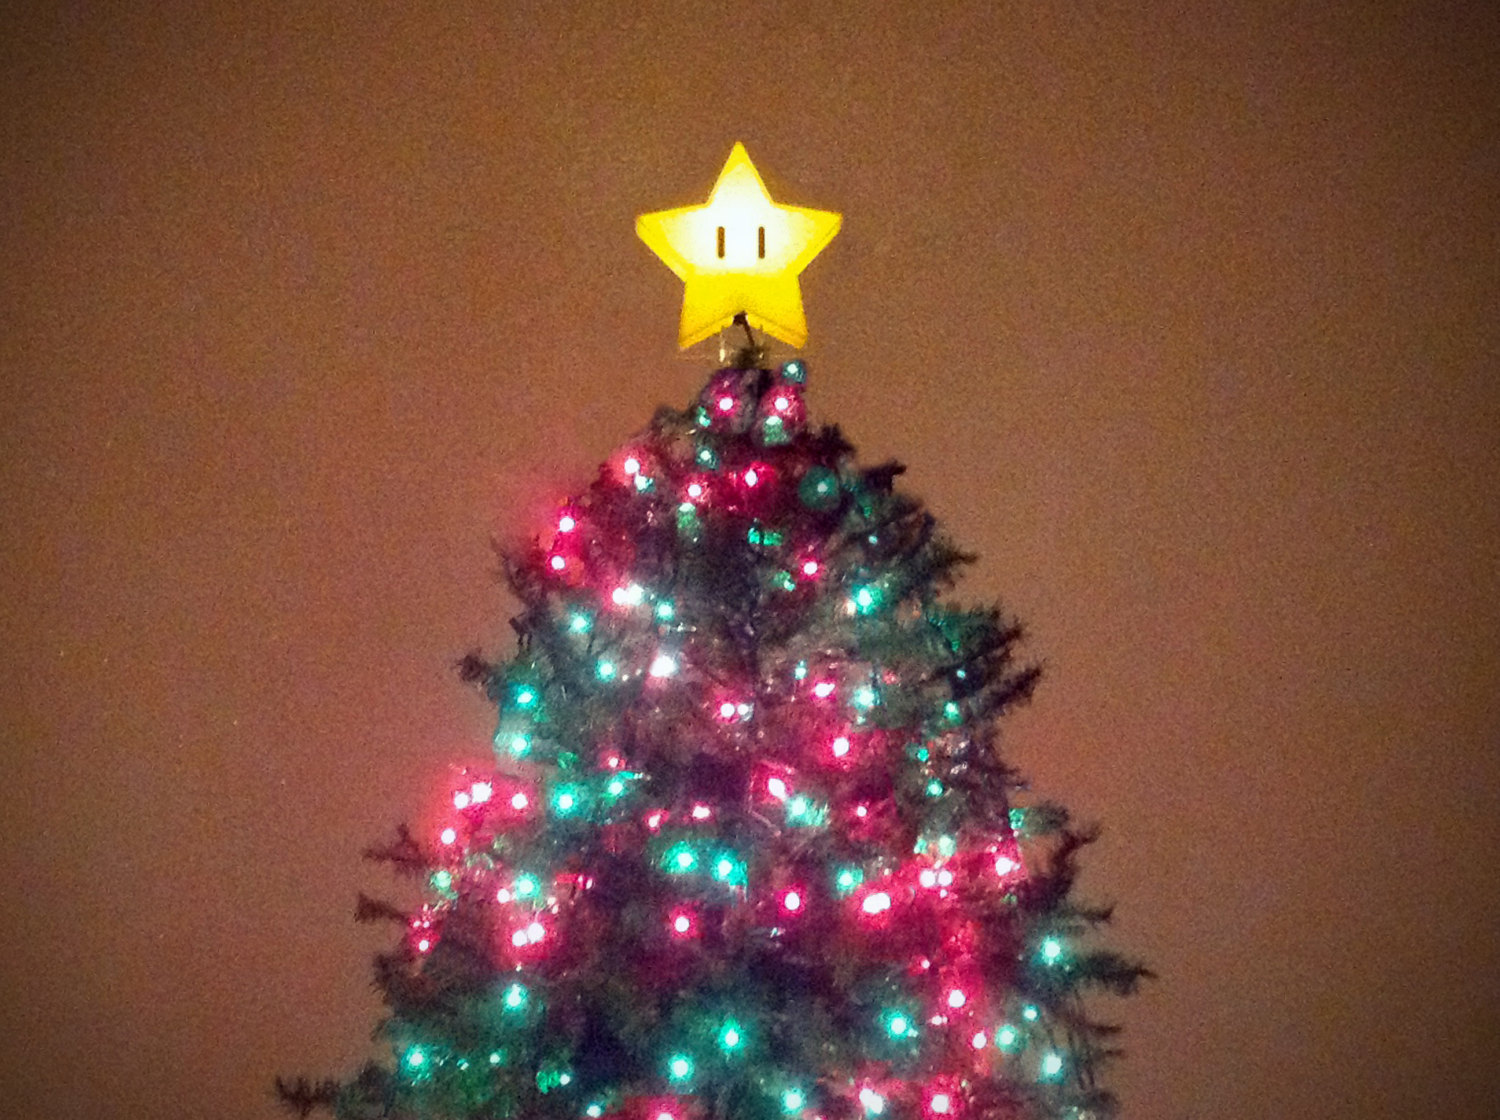 Super Mario Brothers Star Lamp Tree Topper